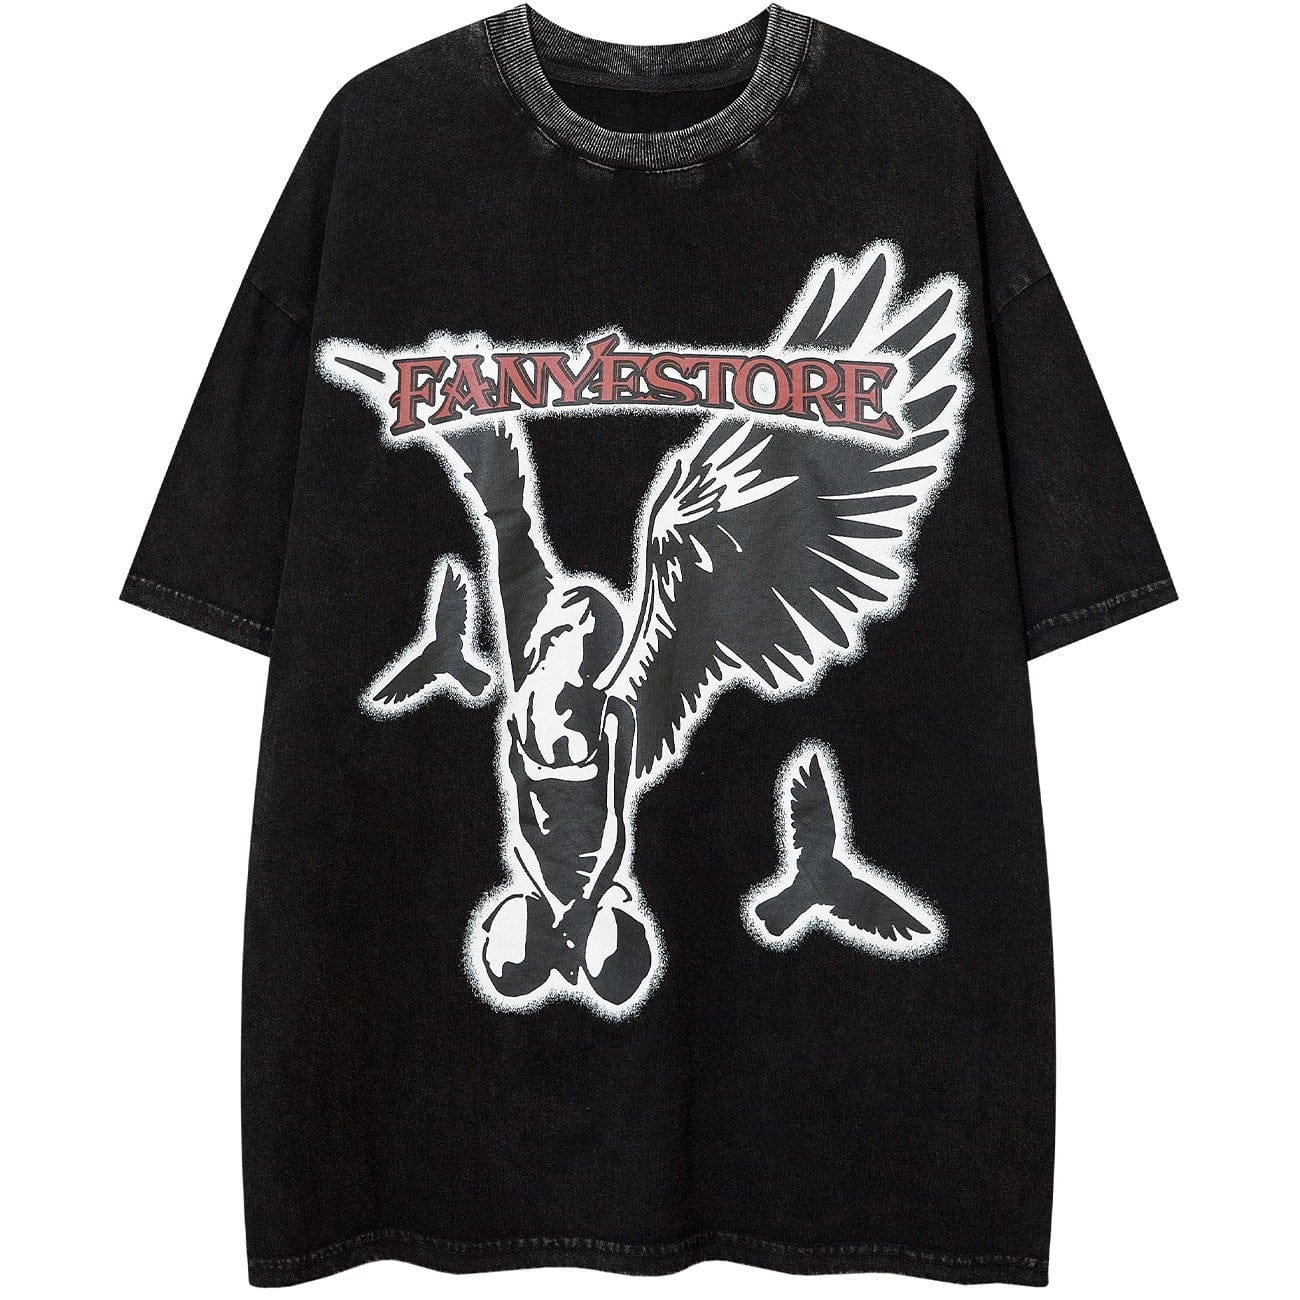 Wings Girl Washed Graphic Tee Streetwear Brand Techwear Combat Tactical YUGEN THEORY